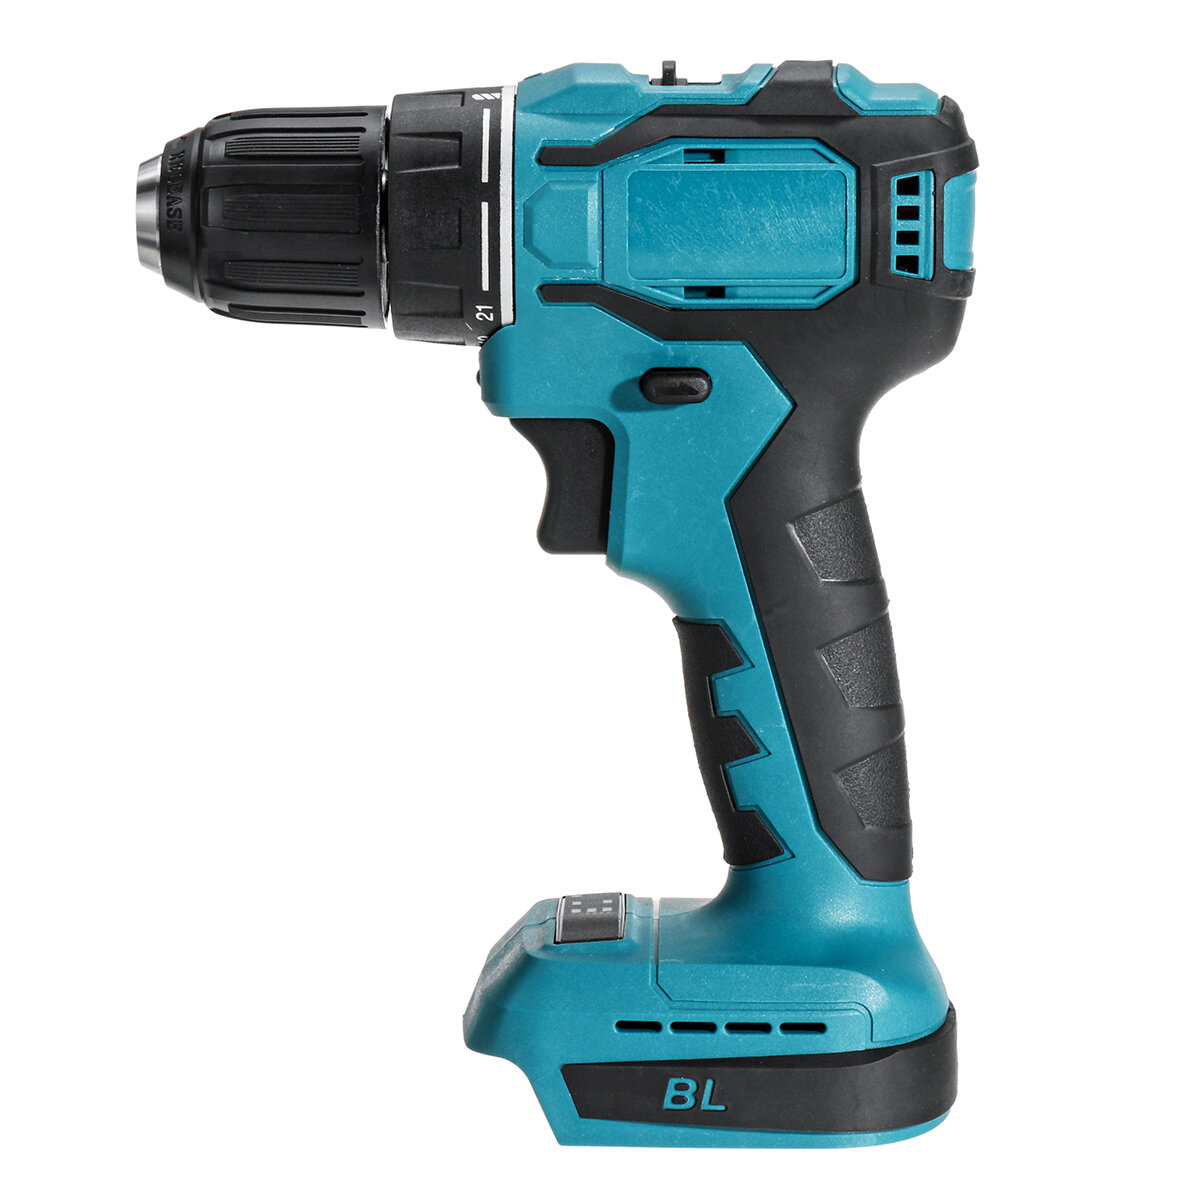 best price,drillpro,10mm,cordless,electric,drill,eu,discount